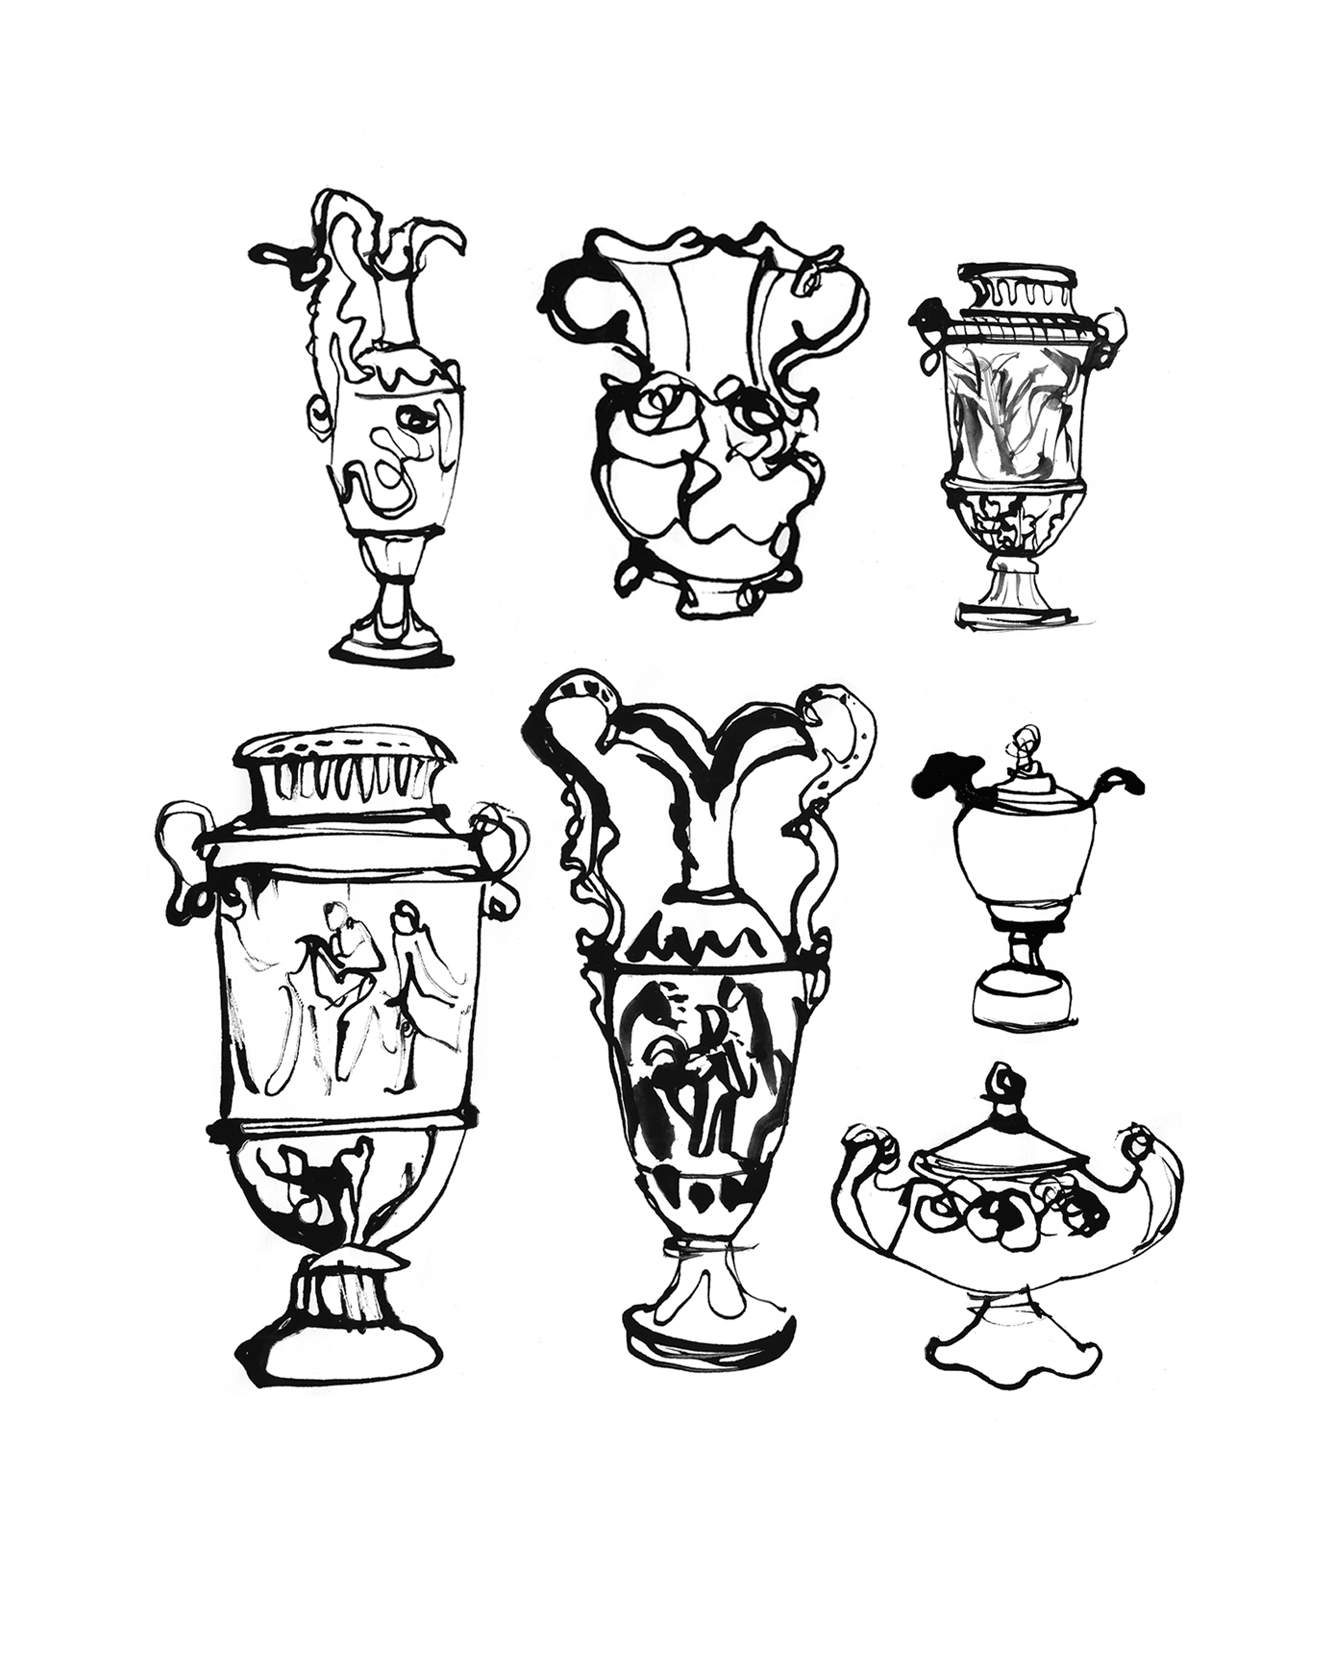 Inky line drawings of Capodimonte porcelain vases for Kiton fashion label. Simple line illustrations that were developed into a repeat pattern